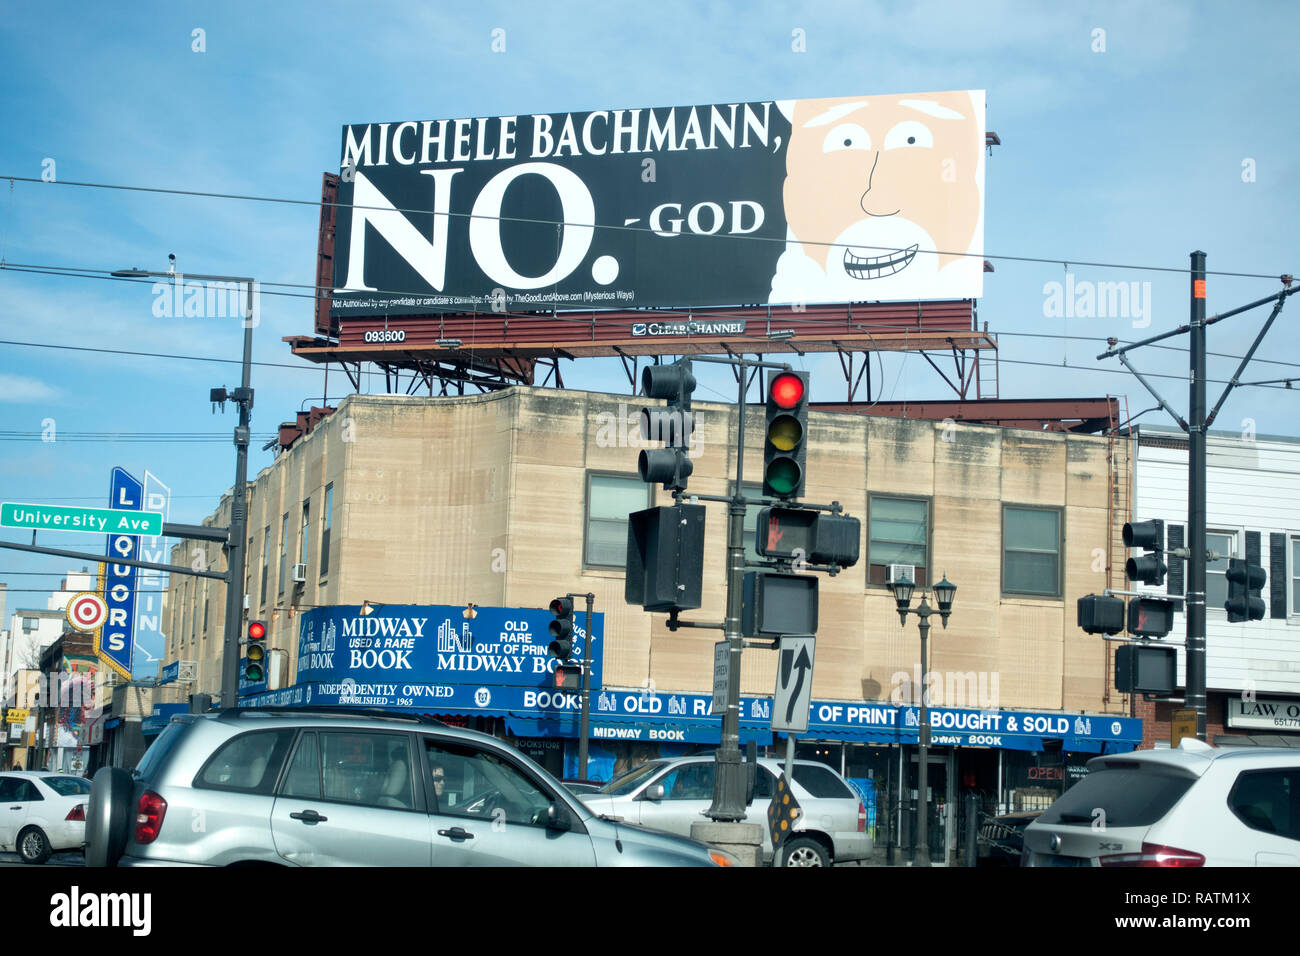 God says 'NO' to political candidate Michele Bachmann on a Billboard over a busy intersection of Snelling & University Ave. St Paul Minnesota MN USA Stock Photo